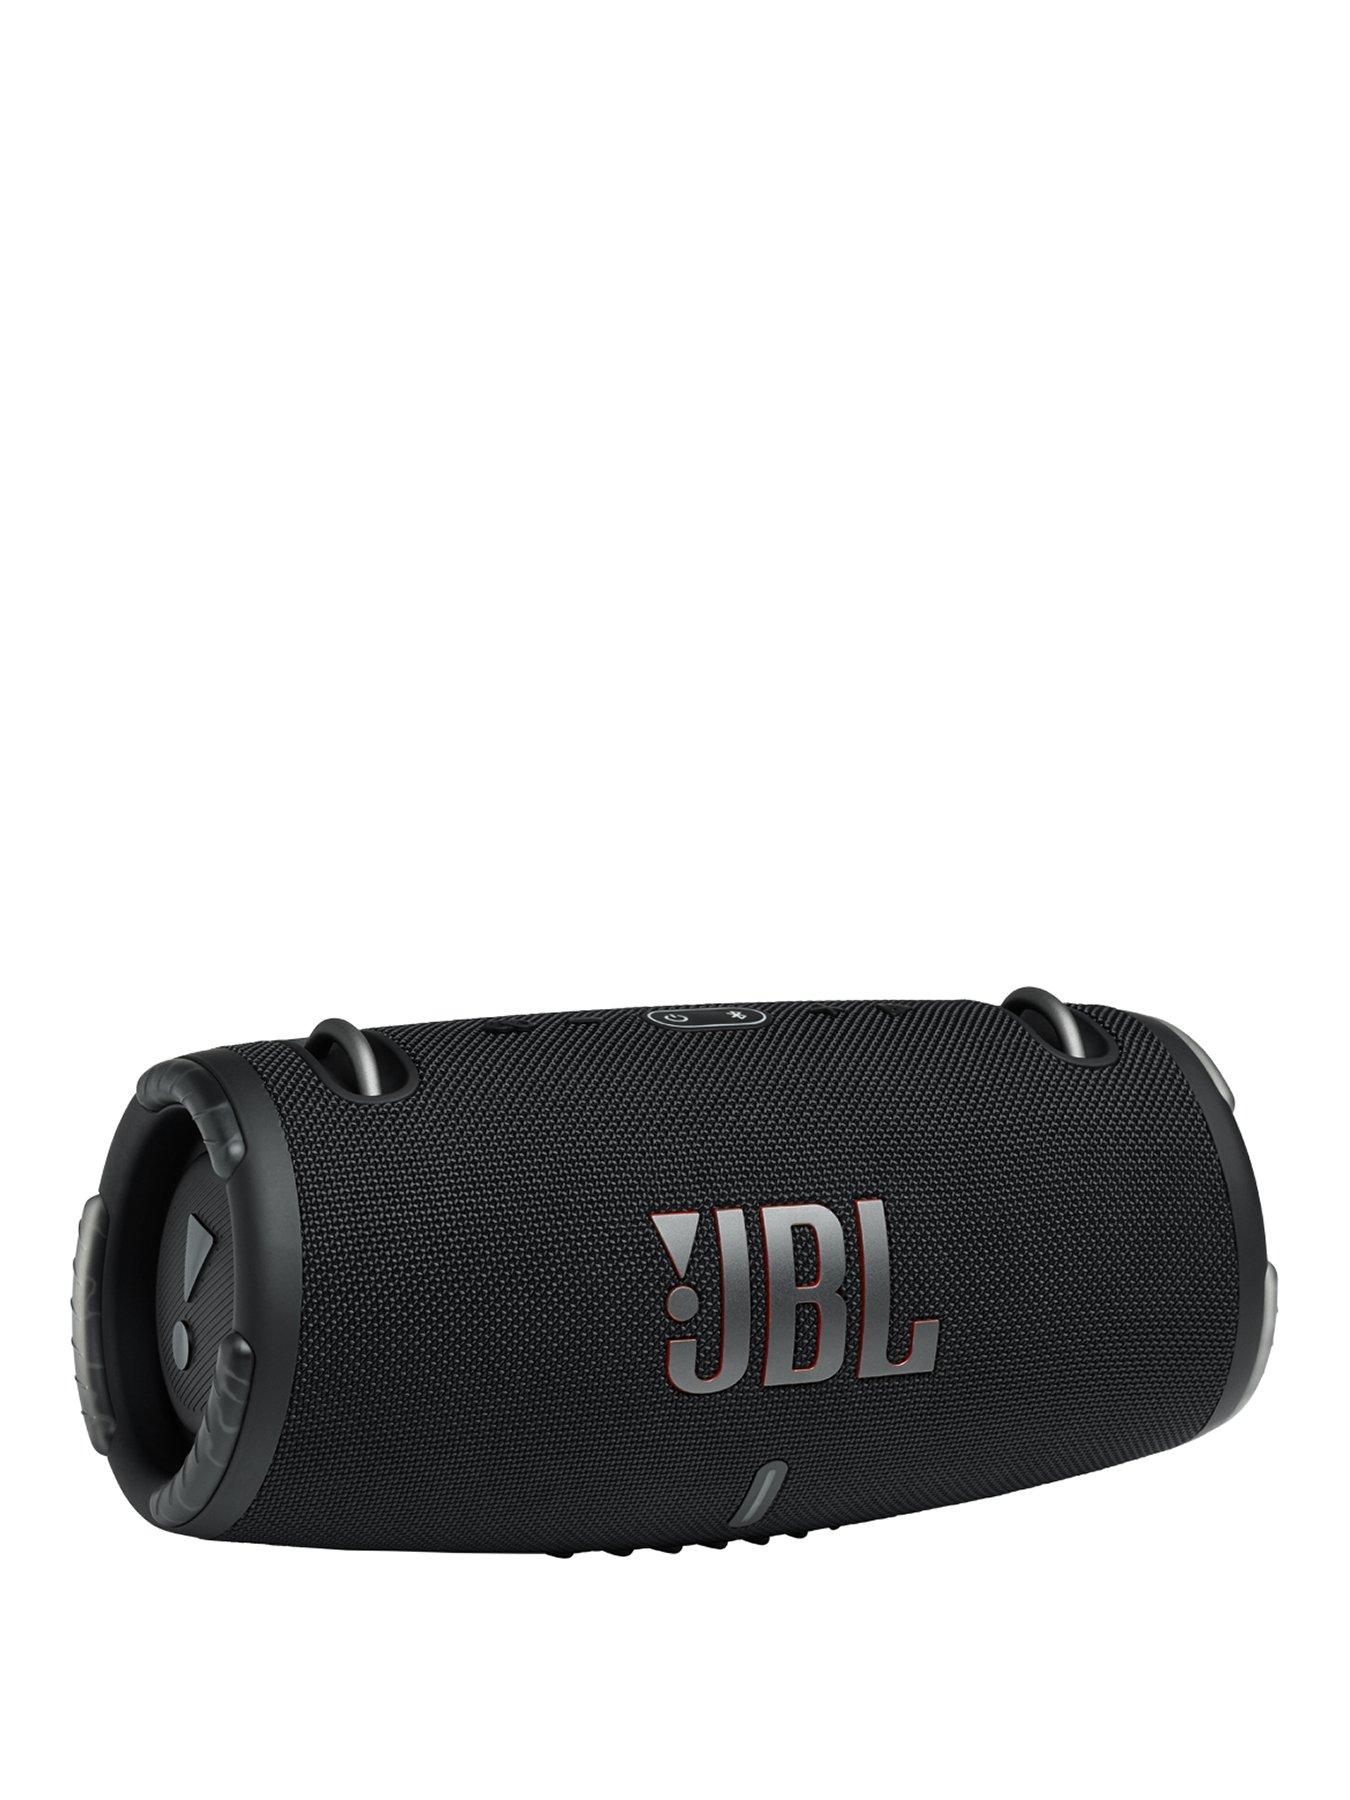 The JBL® Xtreme 2 Makes Waves with its Powerful Audio Performance